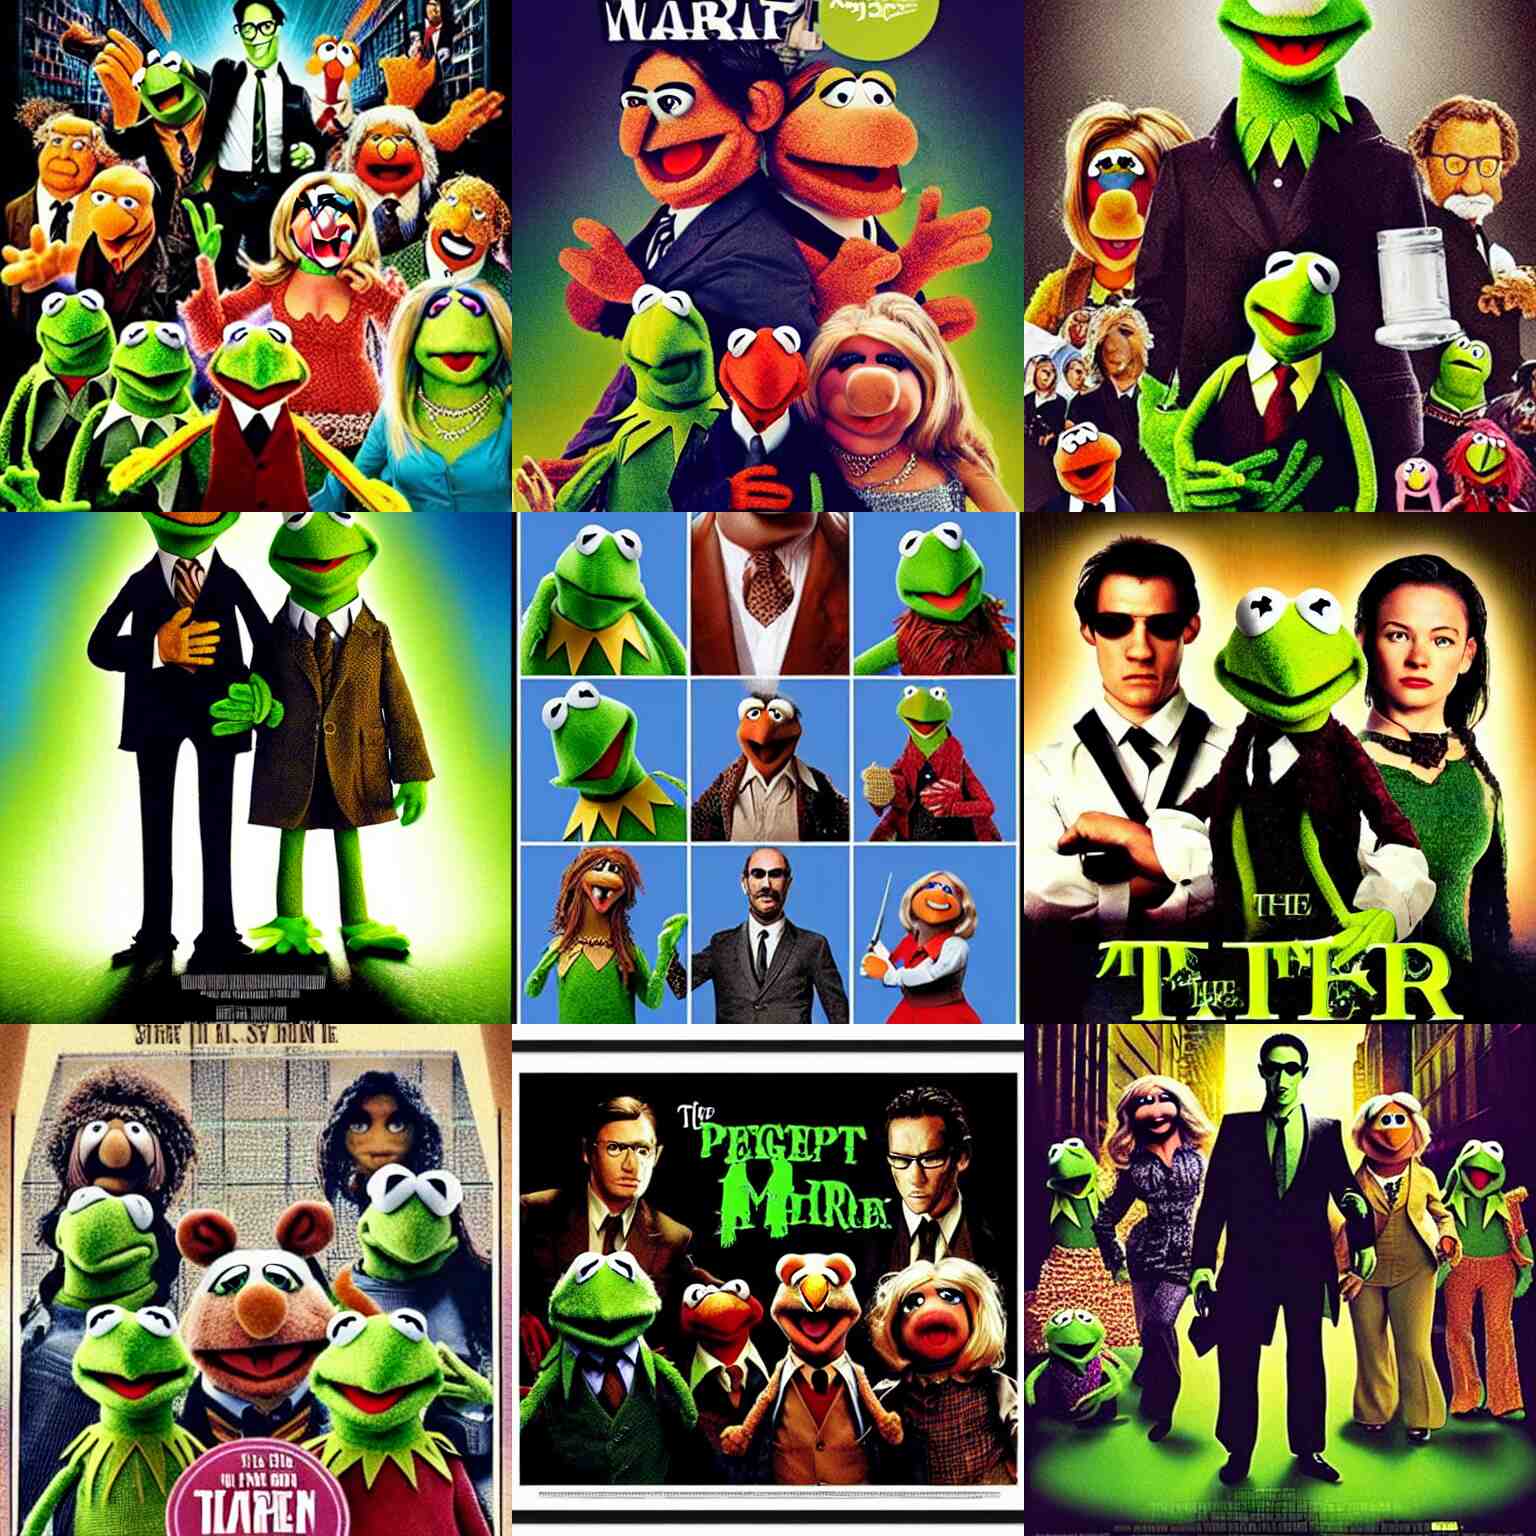 the muppets starring in the matrix, movie poster, detailed, cinematic 